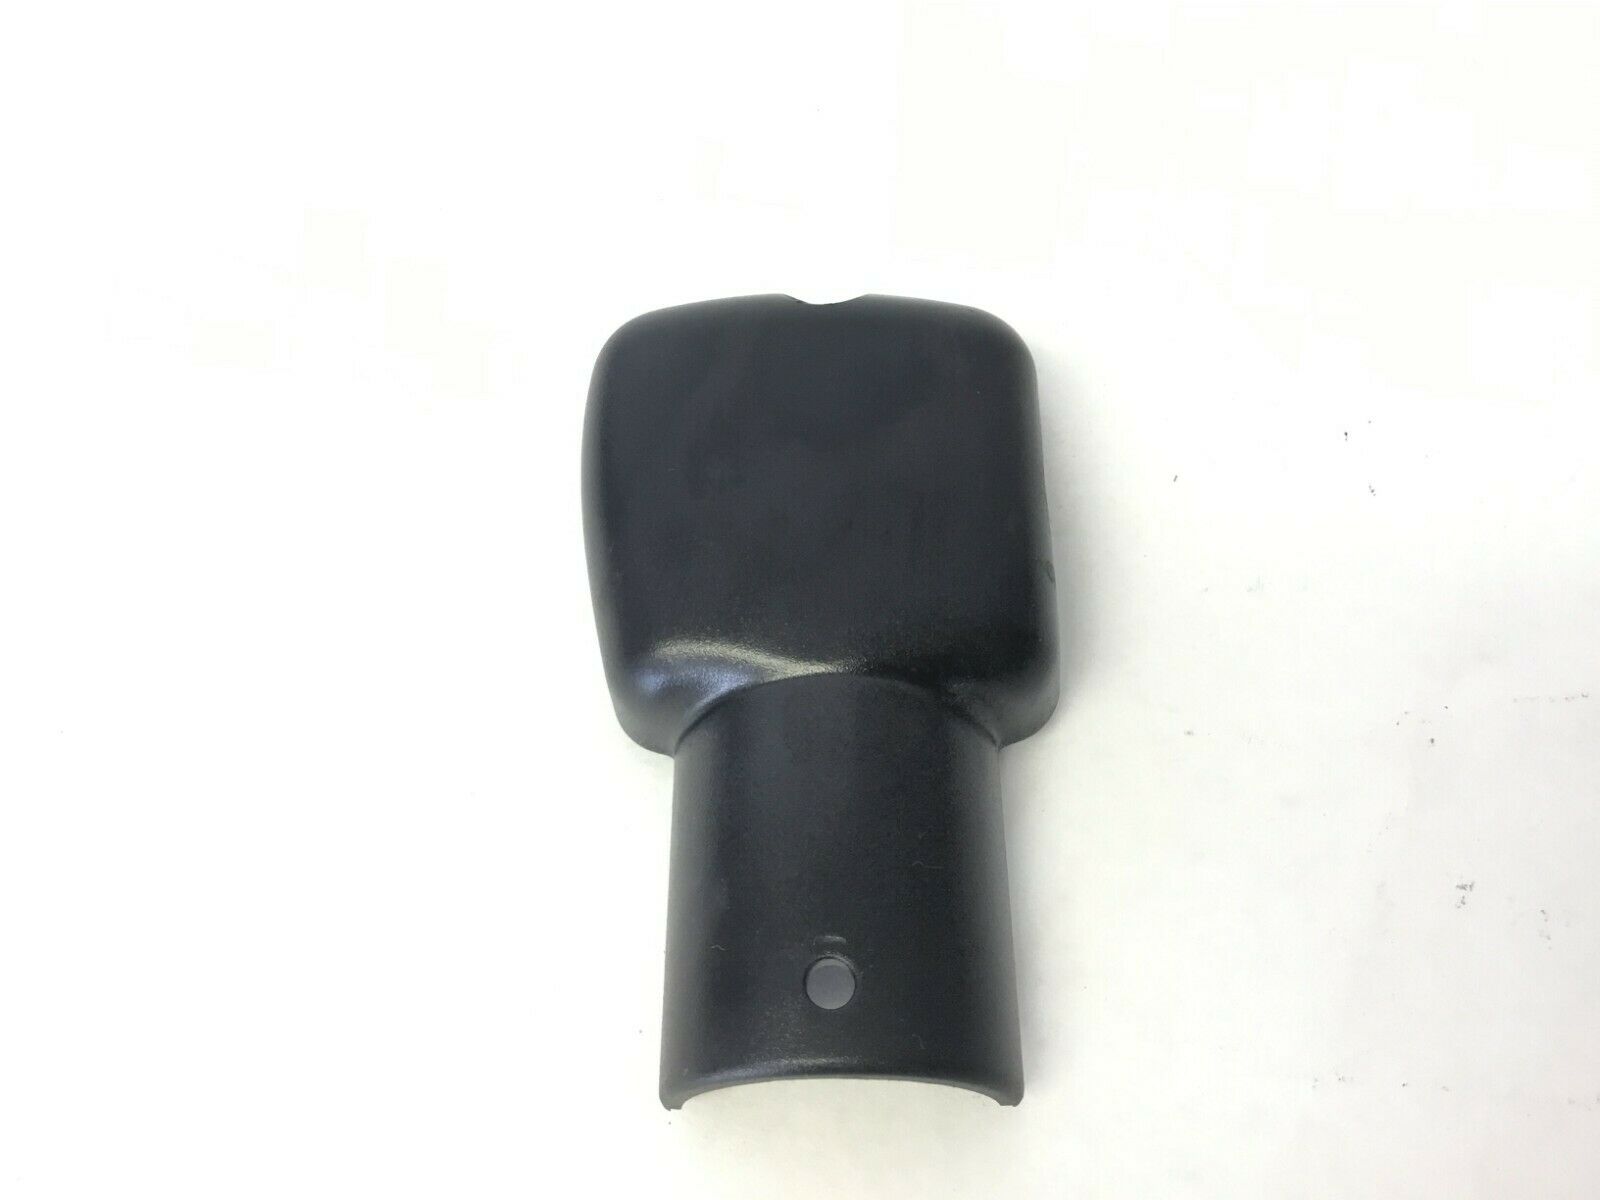 True Fitness Z5.1 Elliptical Arm Cover Cap Top (Used)